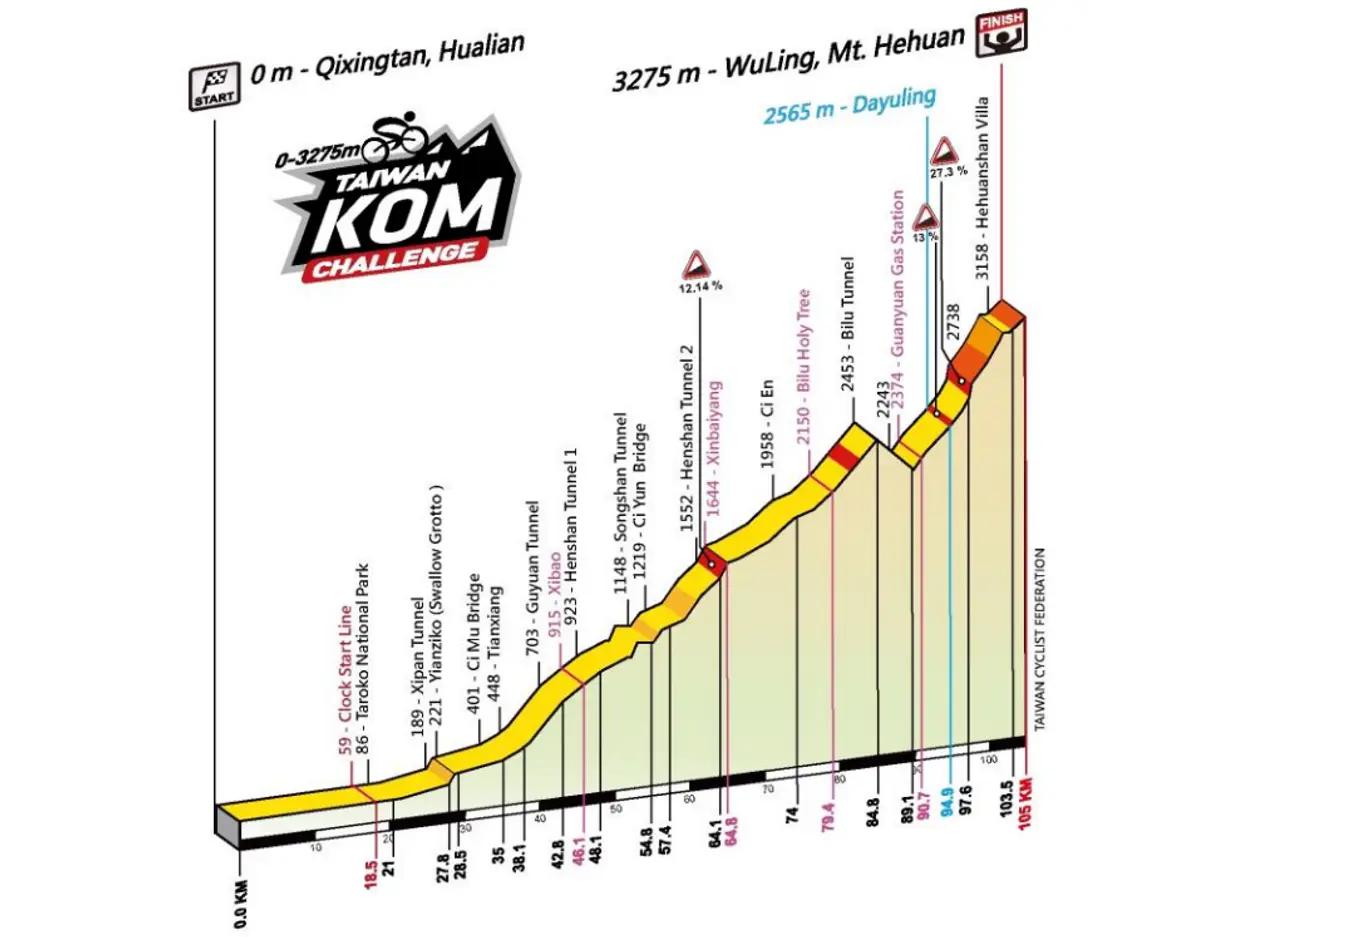 The profile for the Taiwan KOM